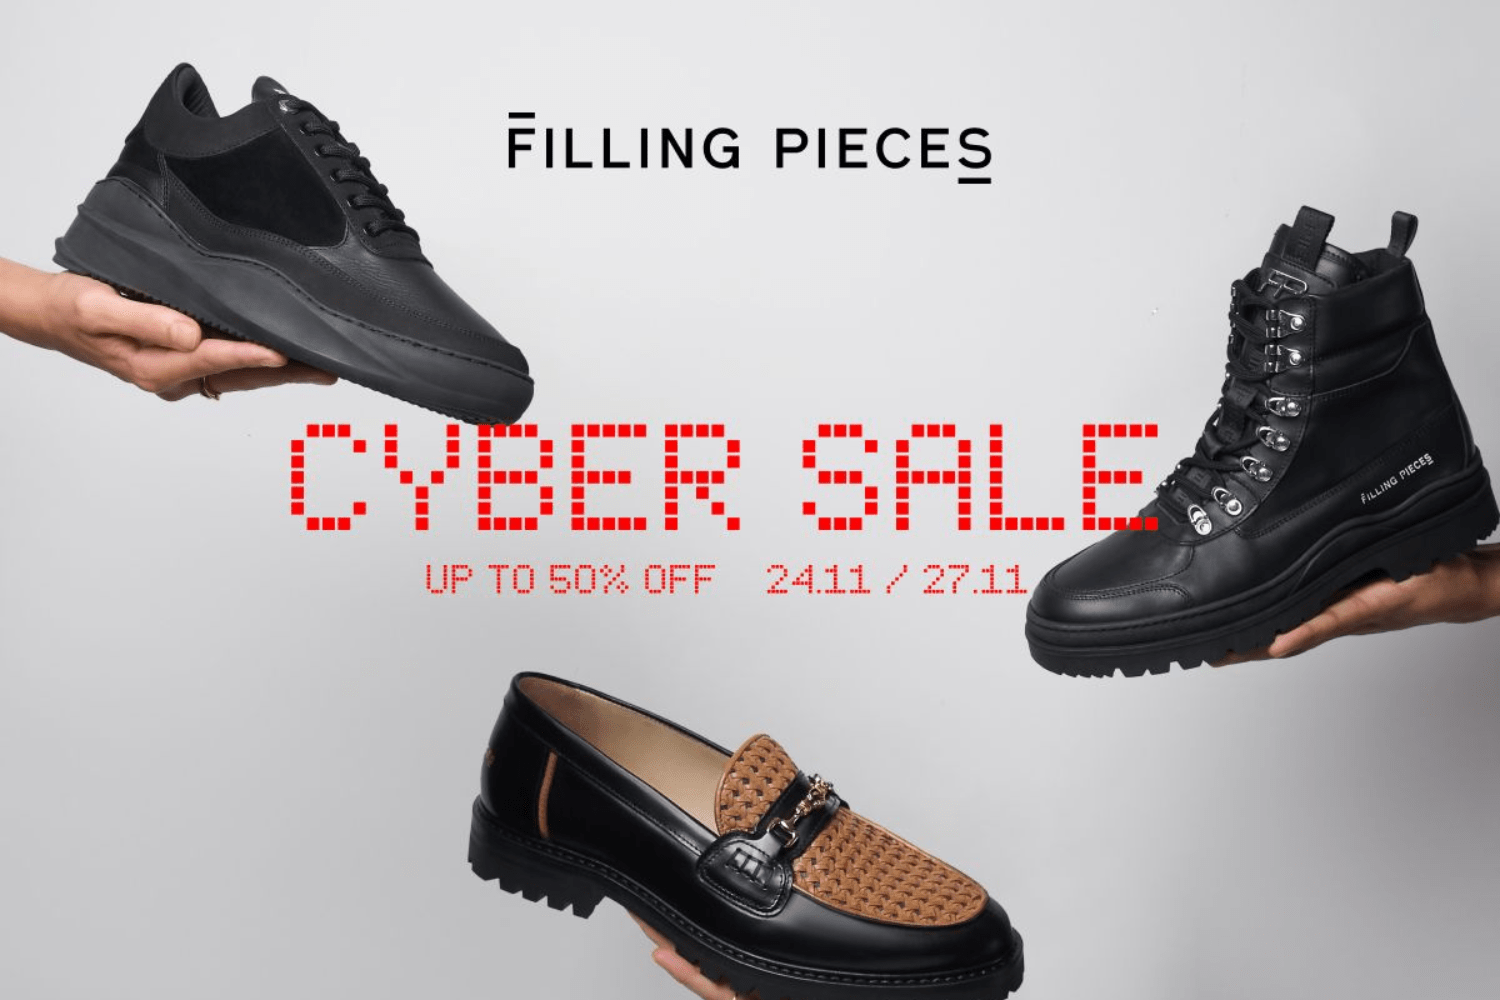 Filling Pieces comes with high discounts in the Cyber Sale